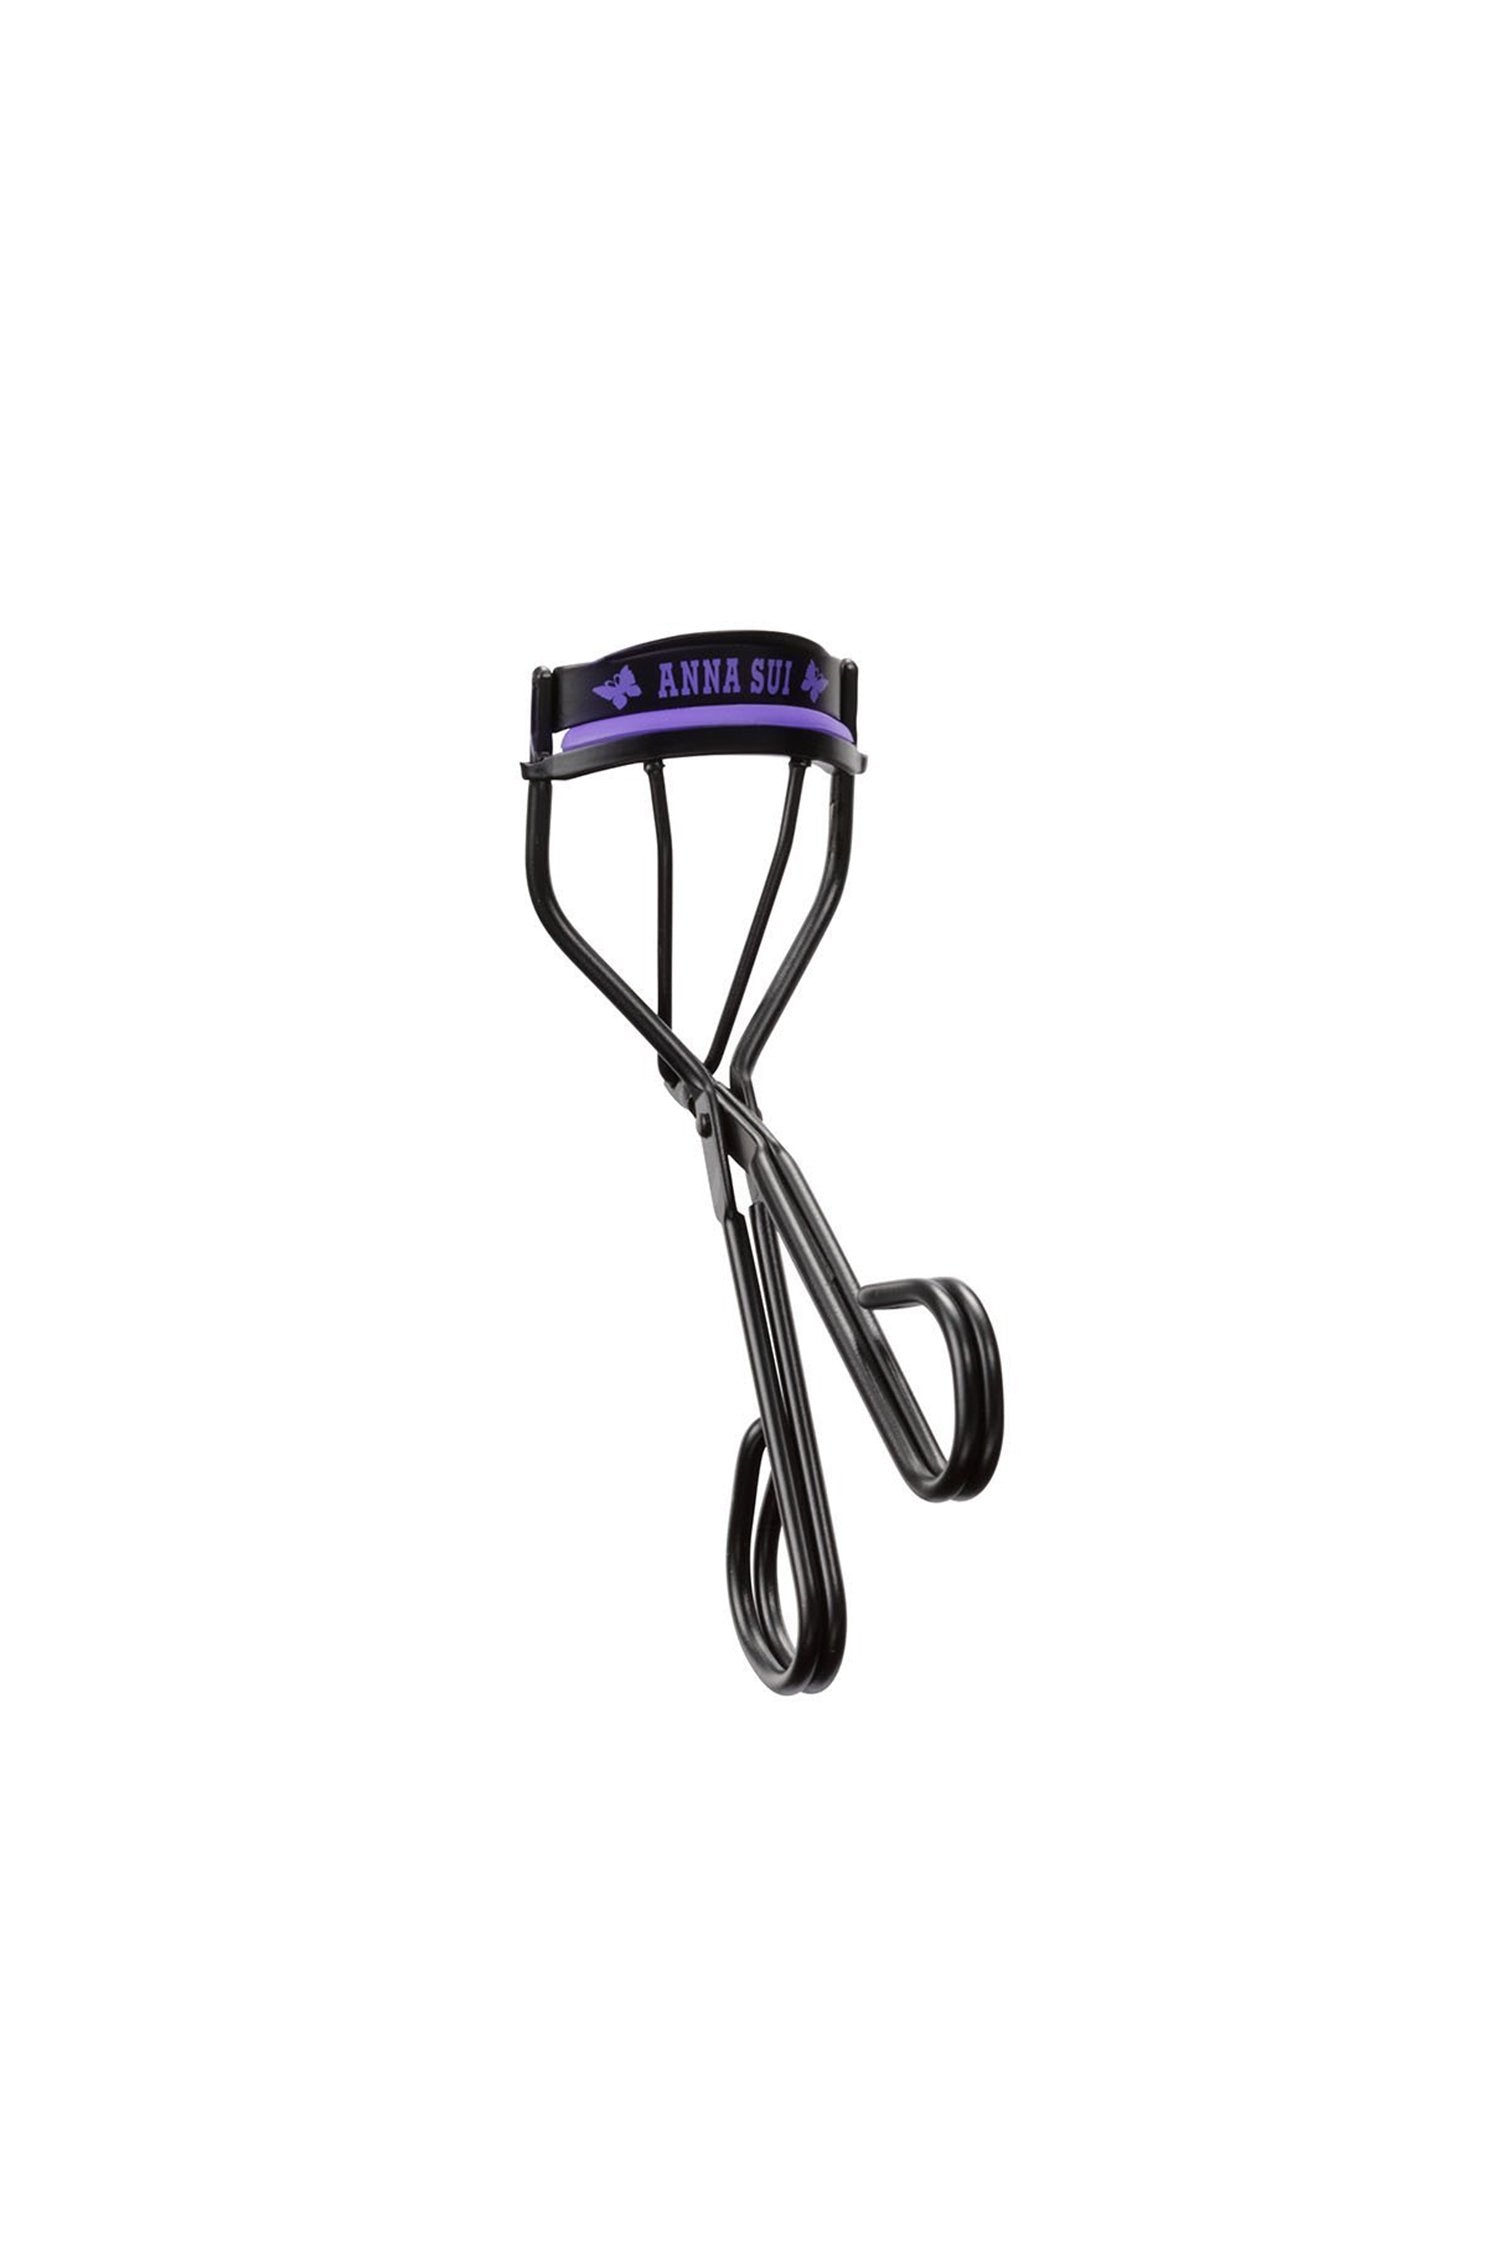 Silicone pad Eyelash Curler provides a protective, stay-put edge for improved safety & optimal curl.